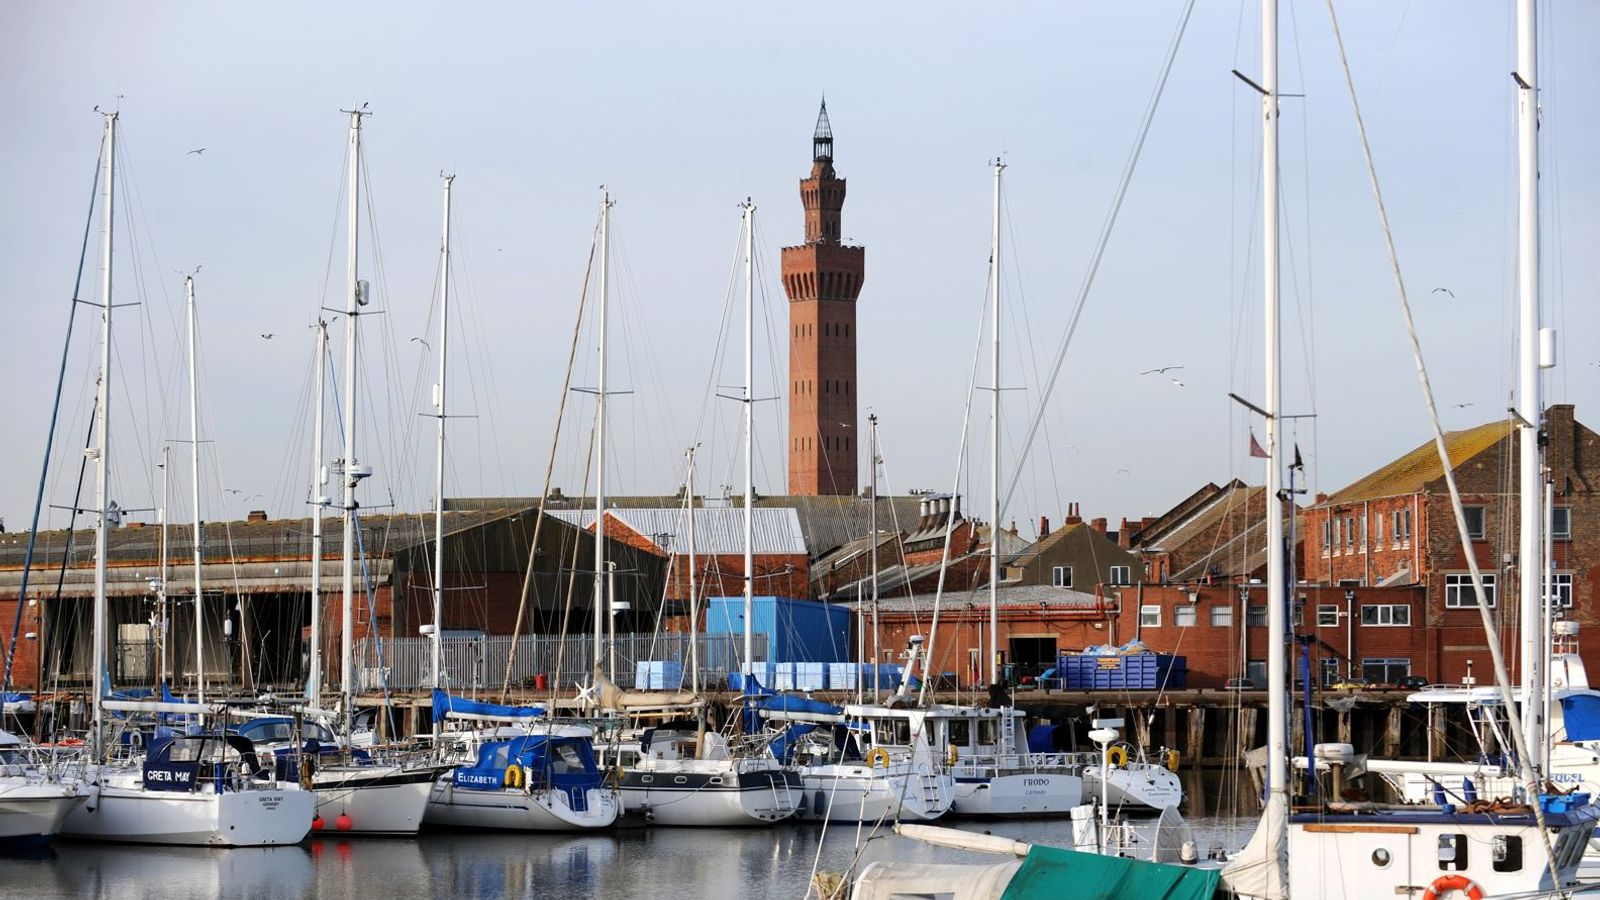 Three Day Millionaire: Grimsby is the subject of a movie again - but this time the town is celebrated, rather than mocked